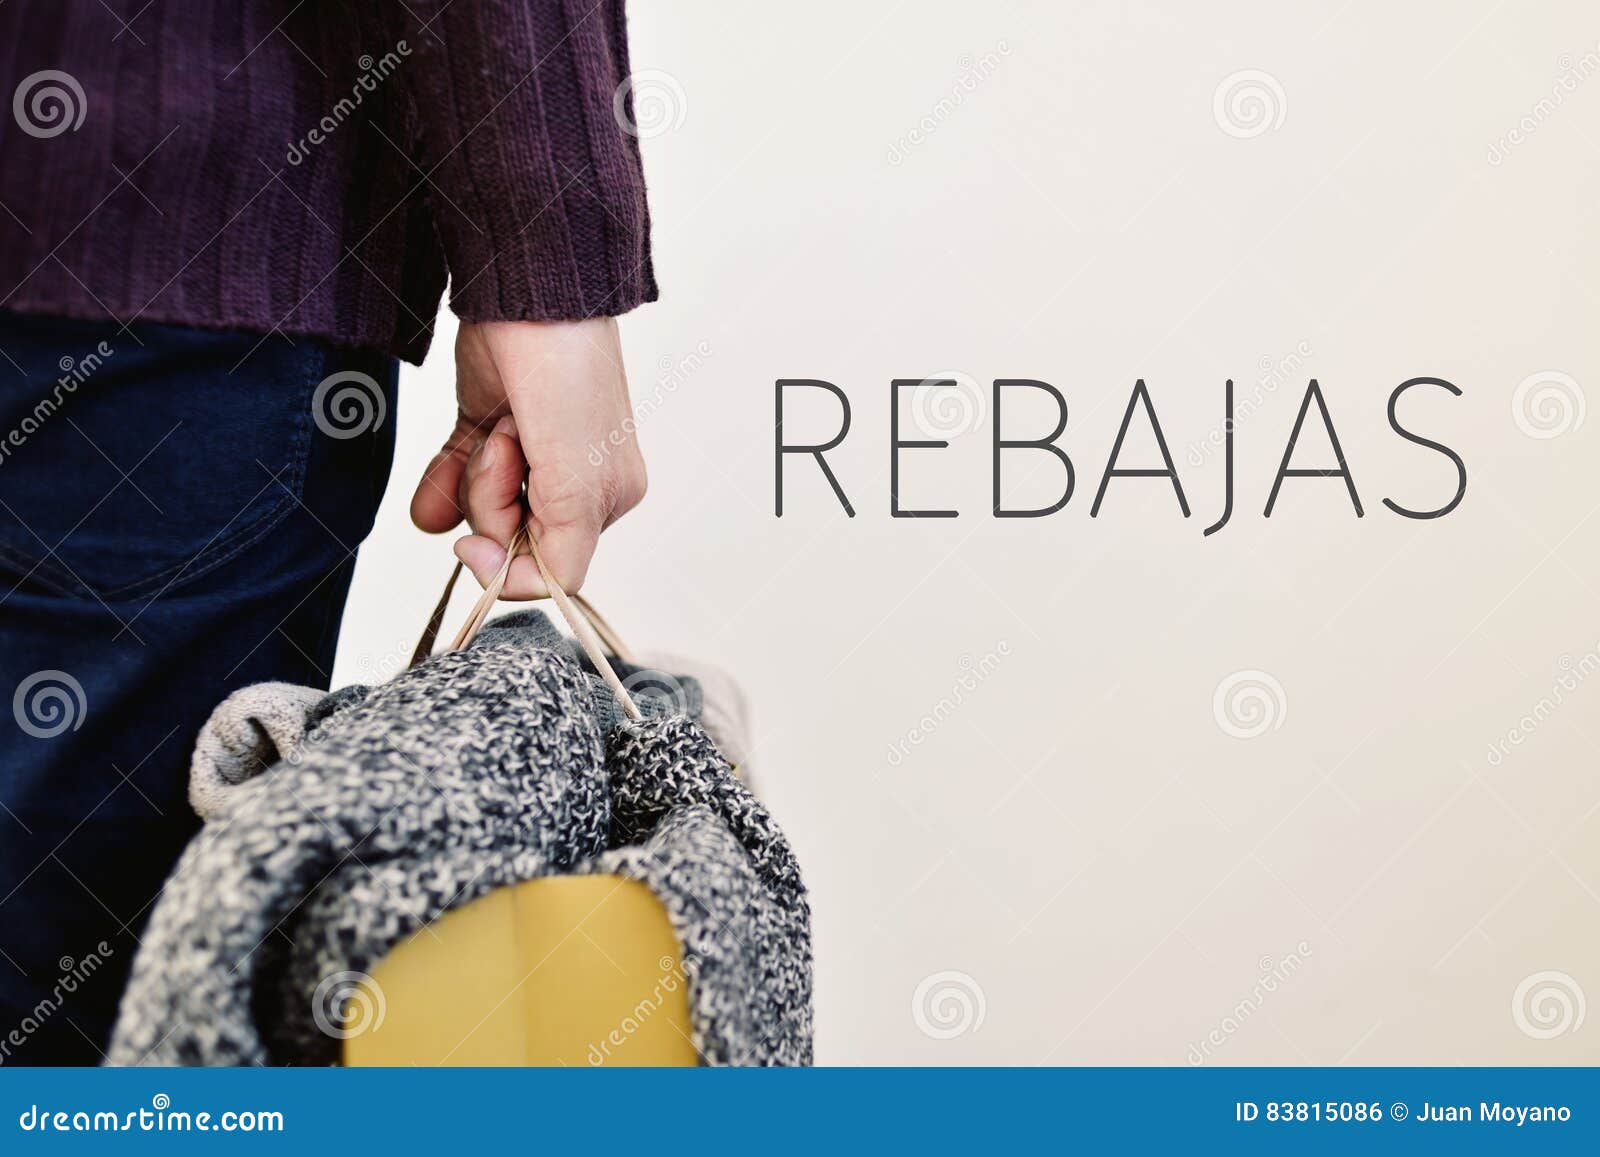 clothes and word rebajas, sale in spanish